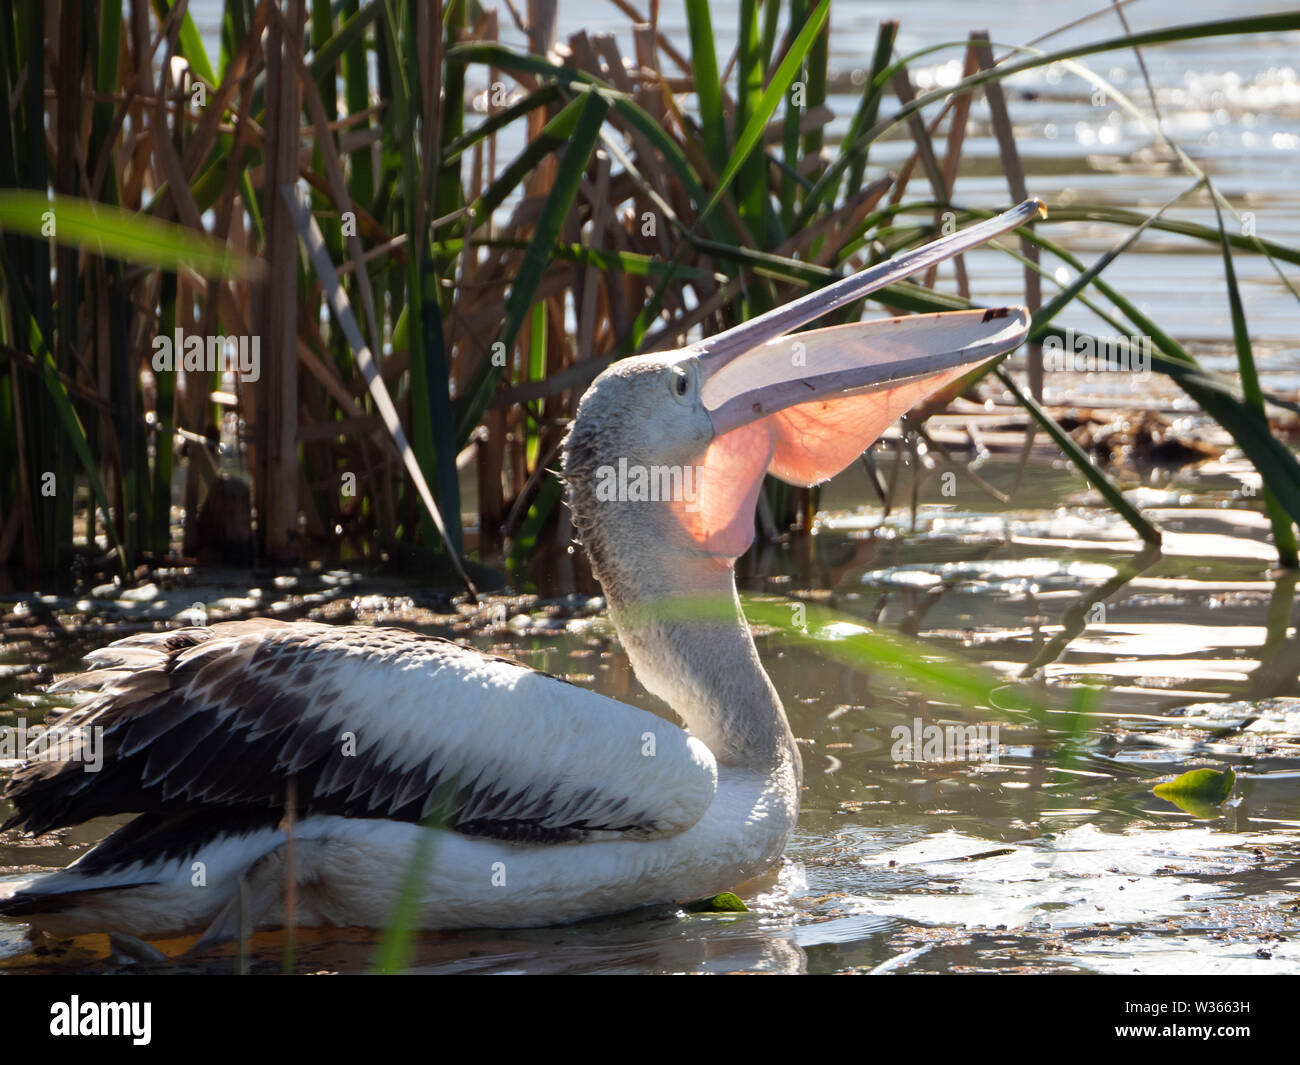 Bird. A large Australian Pelican on the water amongst some reeds, swallowing some food, mouth open, sunlight lighting up its pink throat pouch Stock Photo